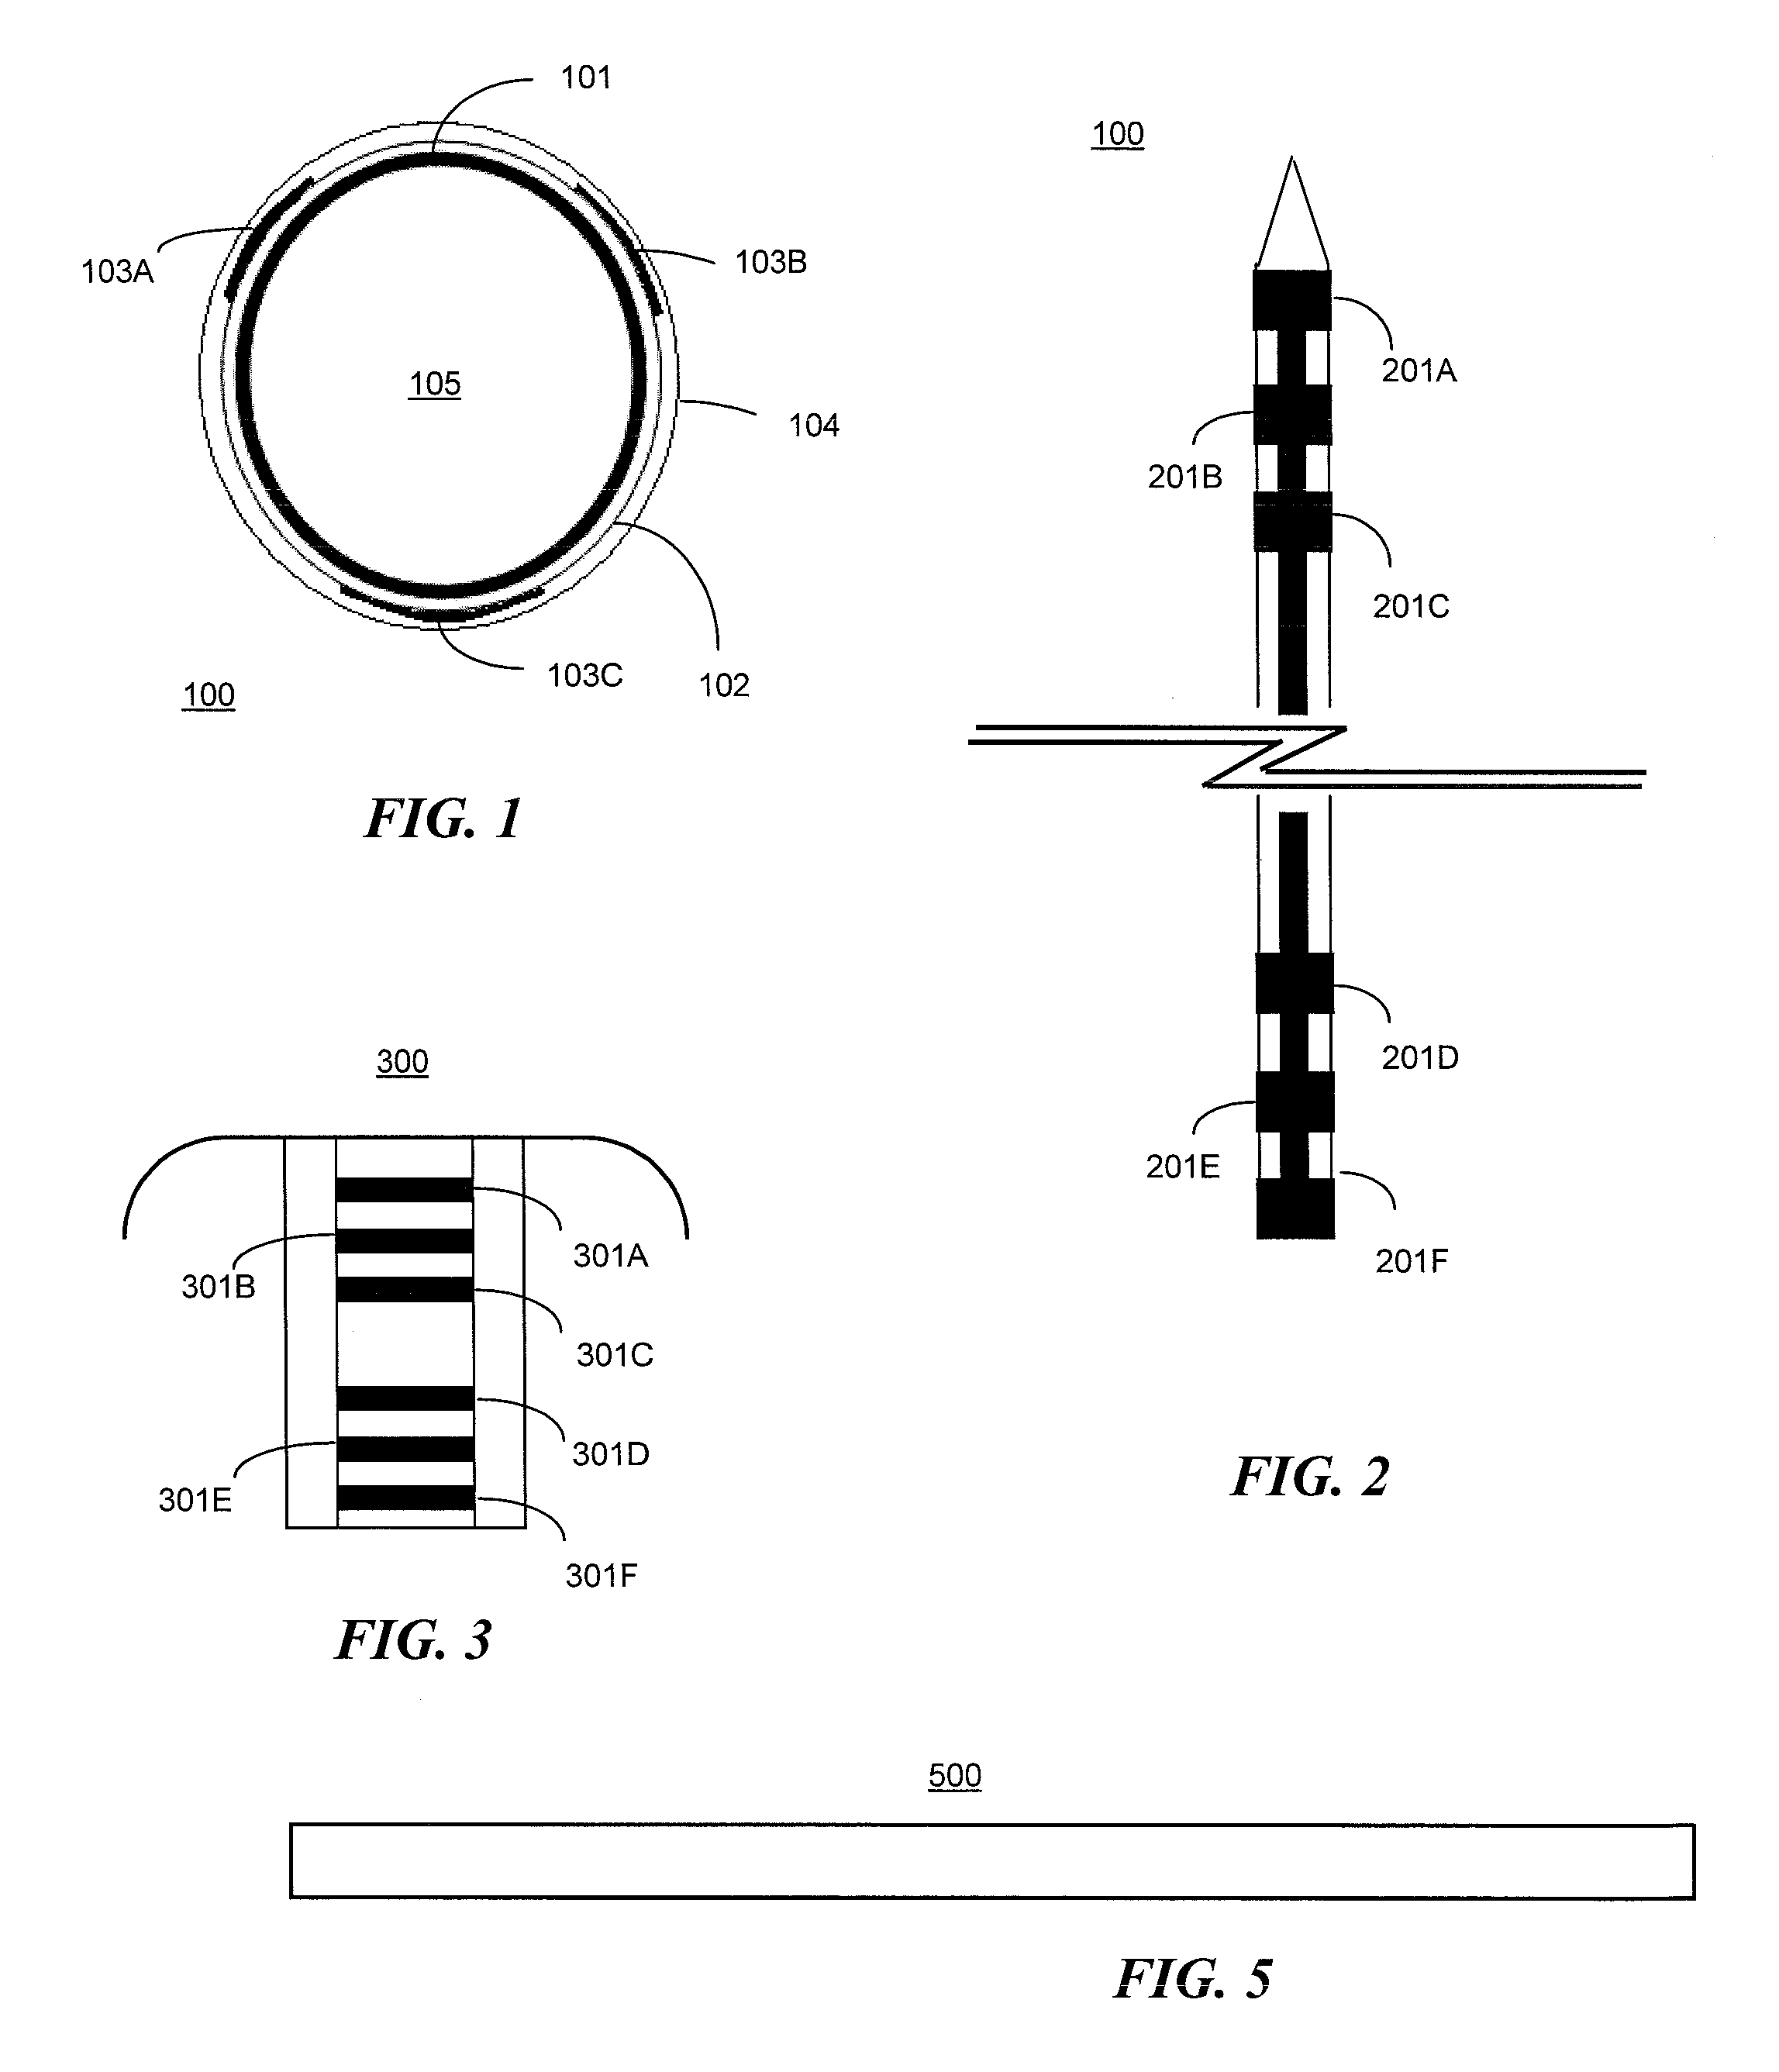 Malleable needle having a plurality of electrodes for facilitating implantation of stimulation lead and method of implanting an electrical stimulation lead